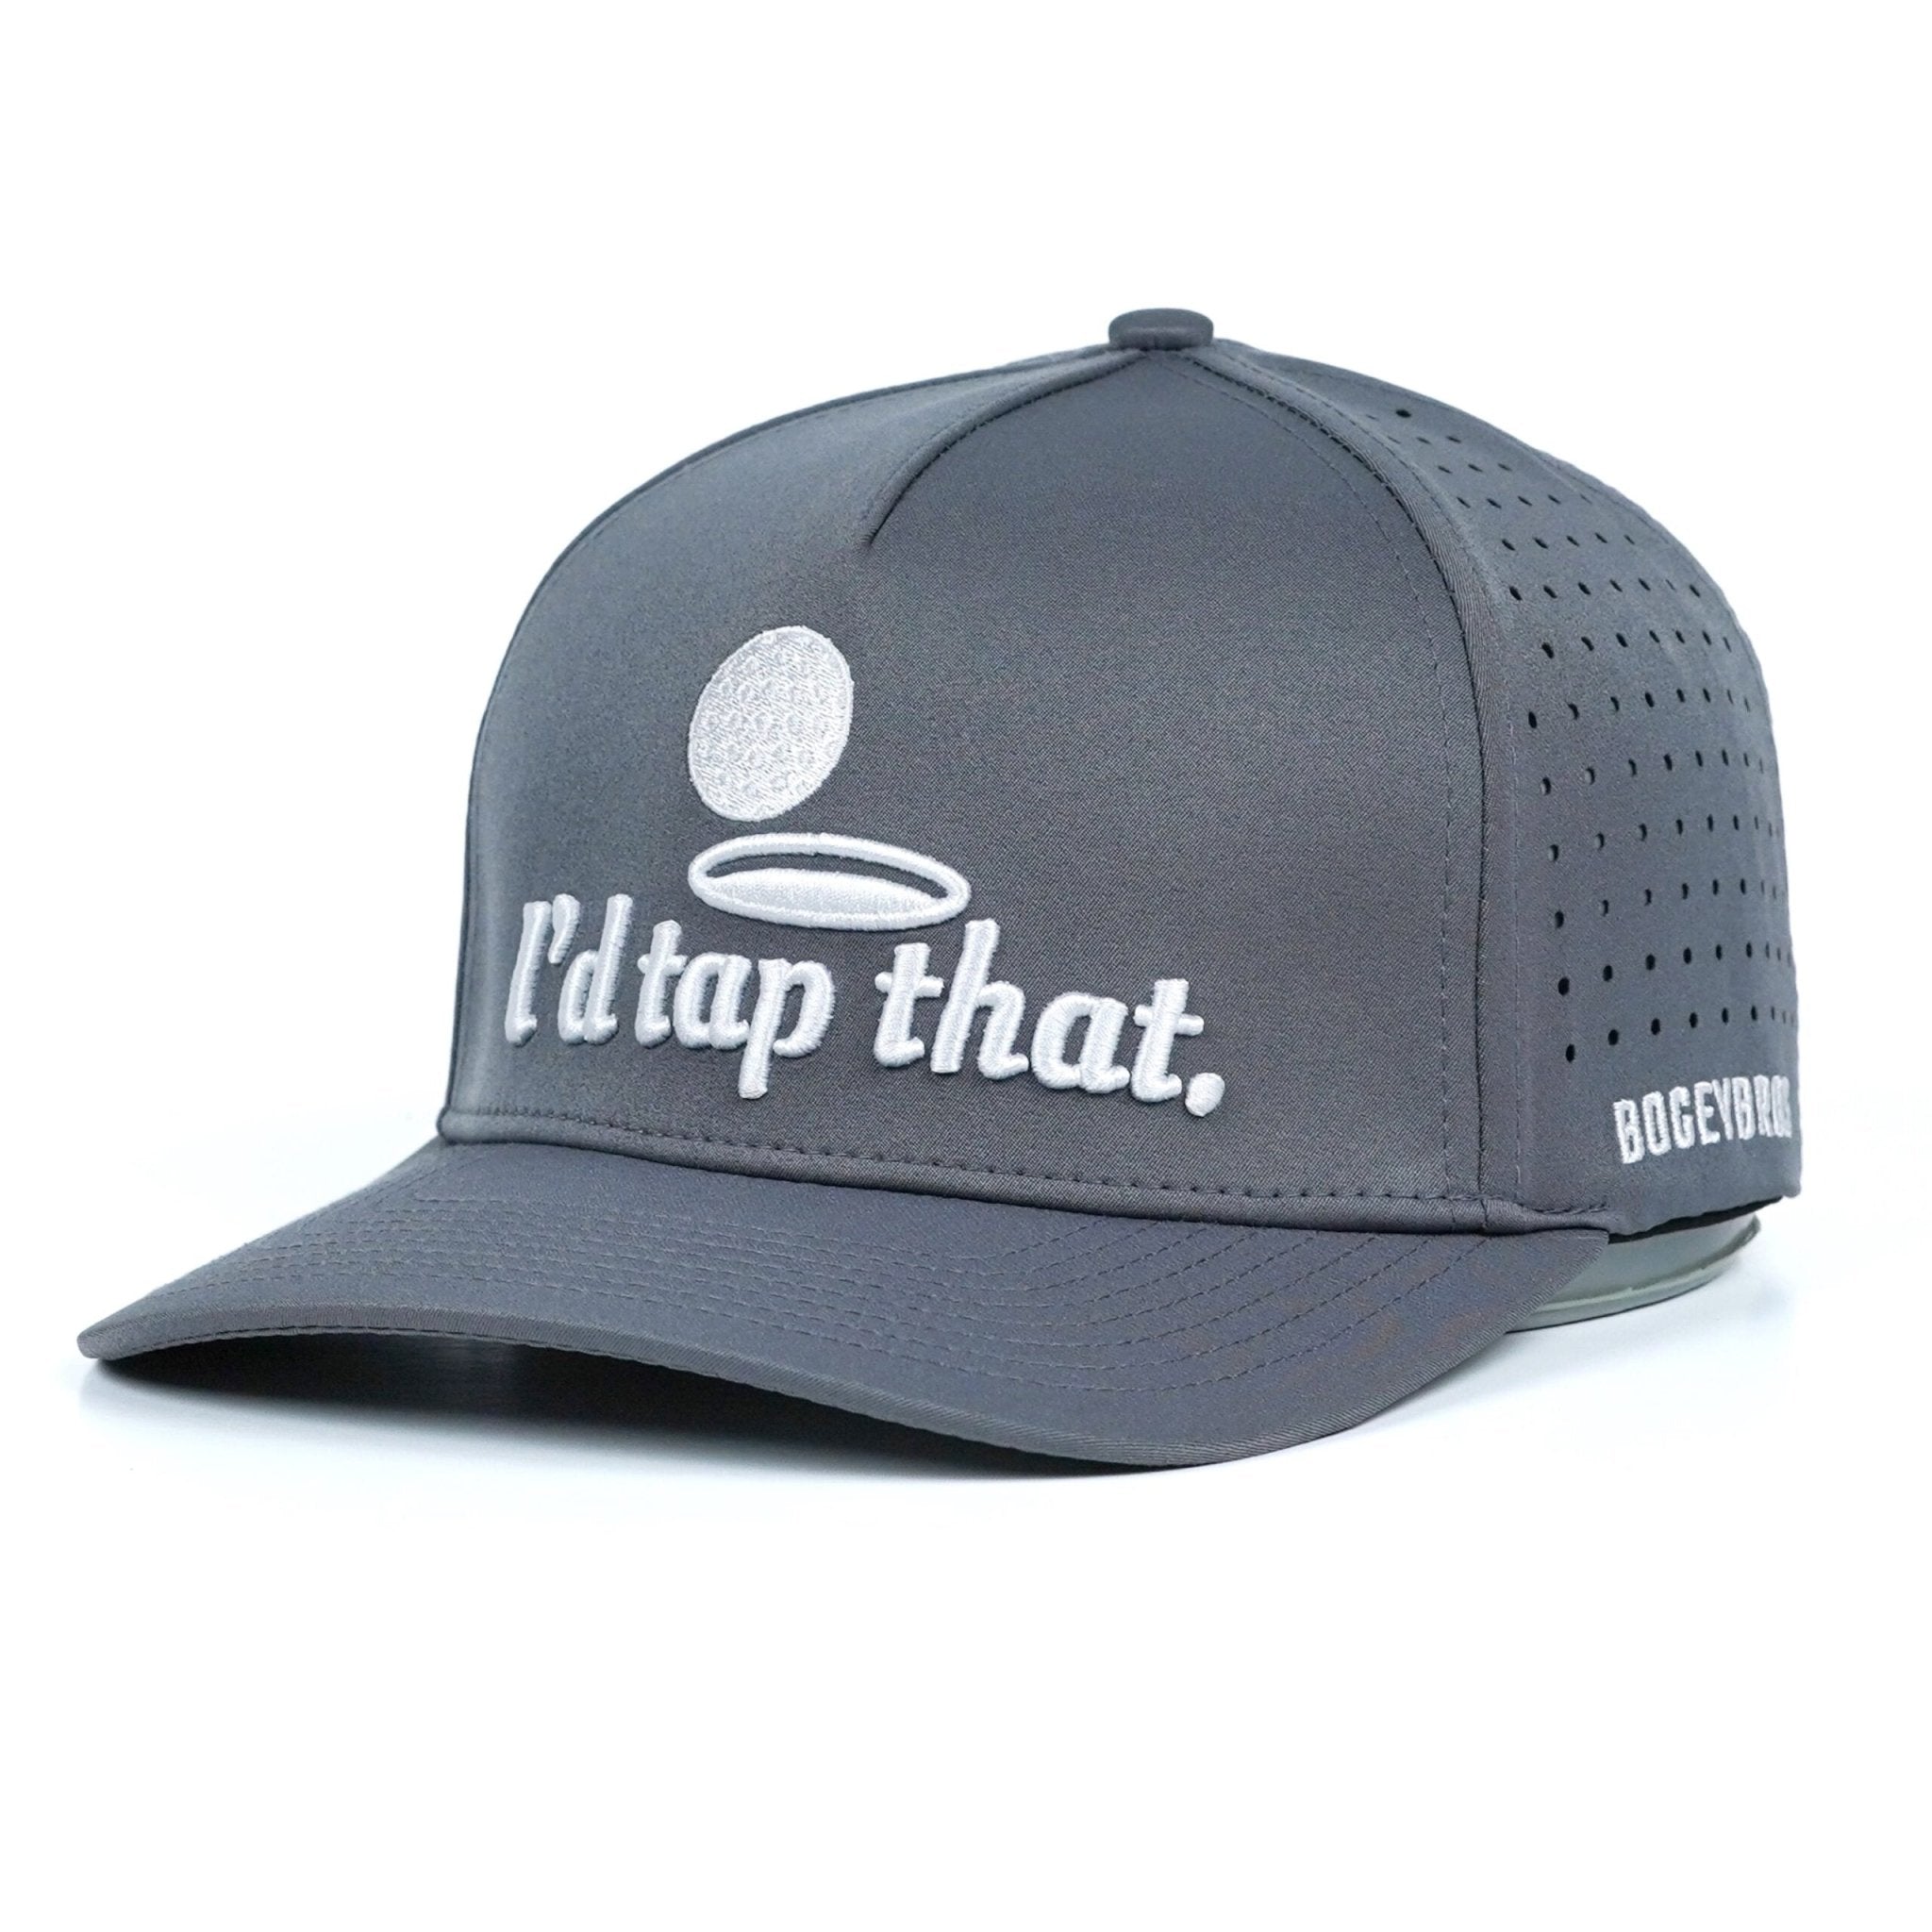 Funny Hats for Adults Humor I Love My Zaddy Trucker Hats Golf Hats Men Funny